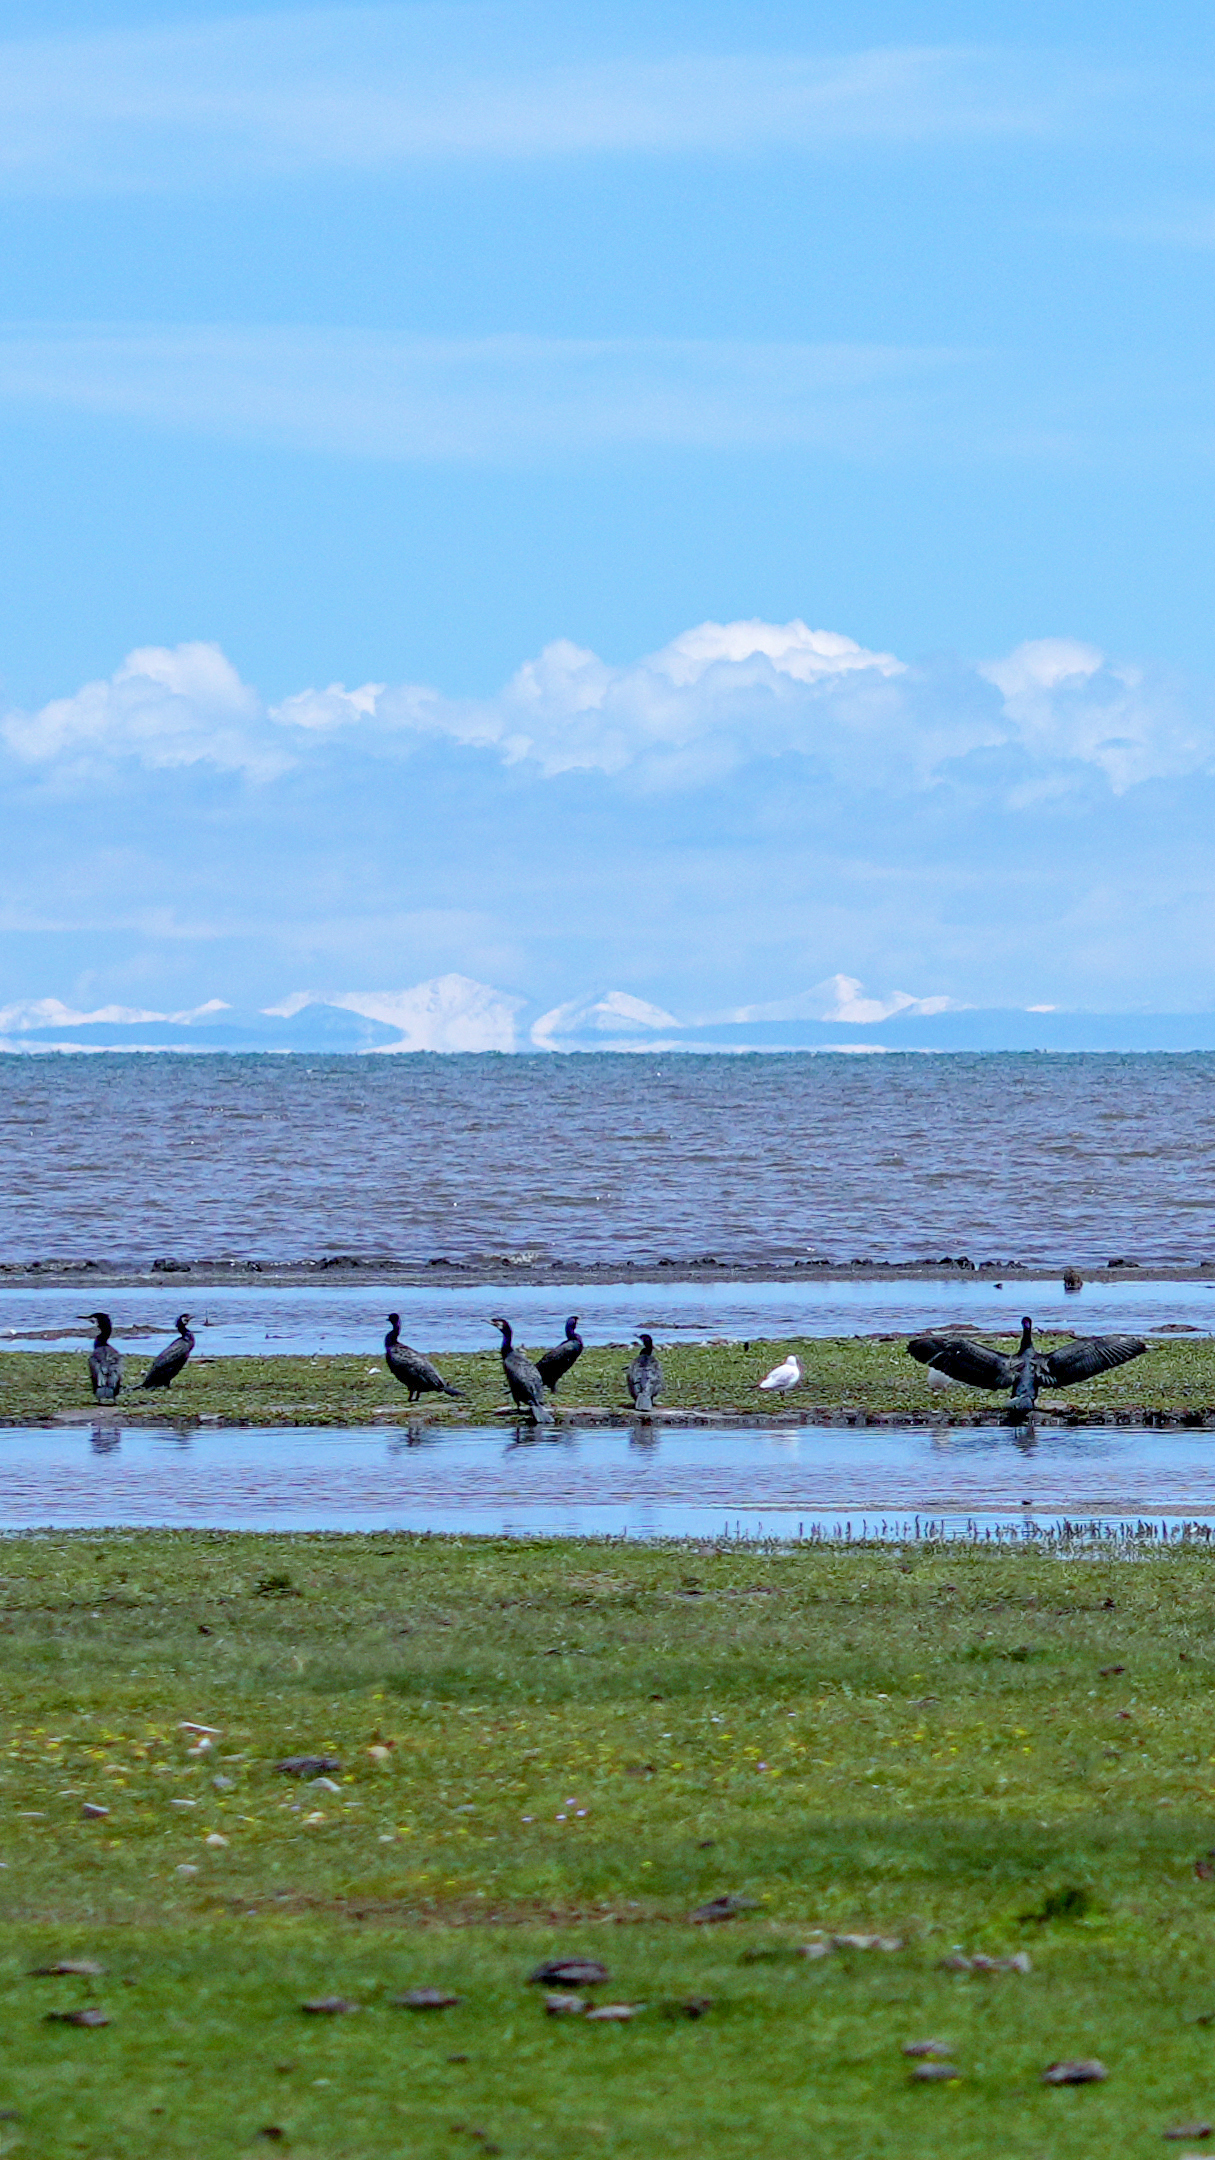 Nature's splendor: A glimpse of Qinghai Lake in the summer